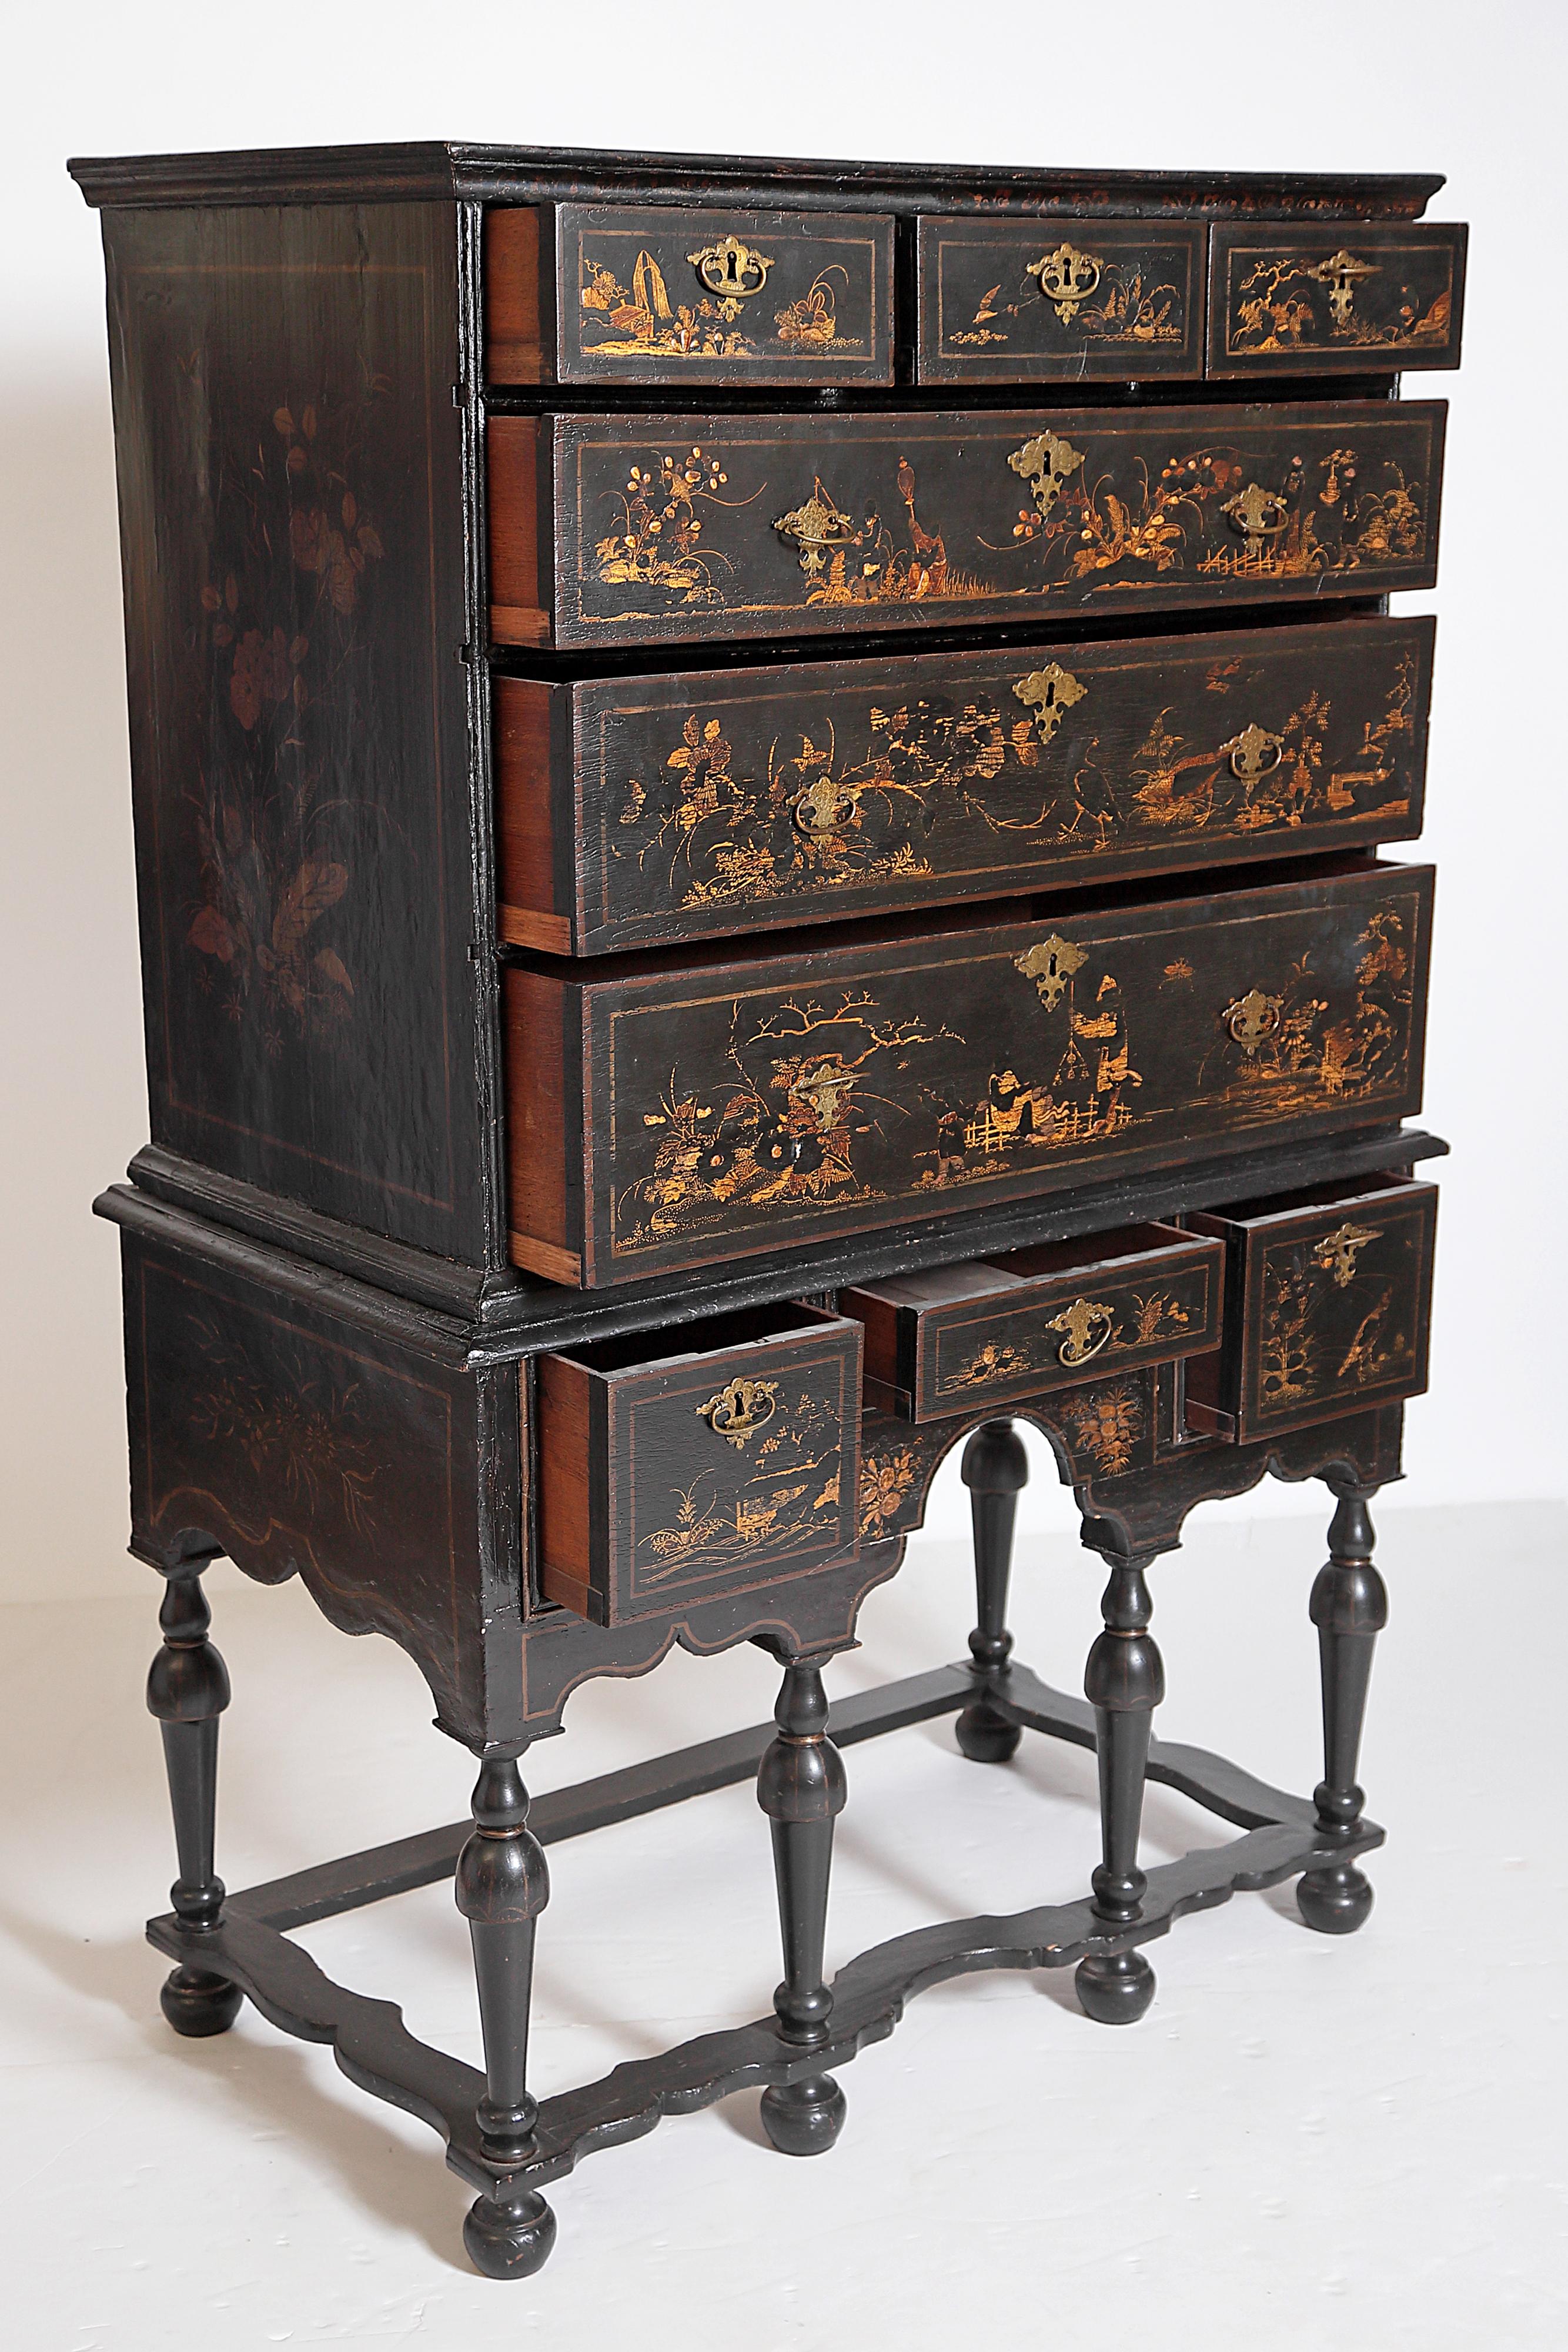 William and Mary William & Mary Chest on Stand / Black Lacquer and Gilt Chinoiserie Decoration